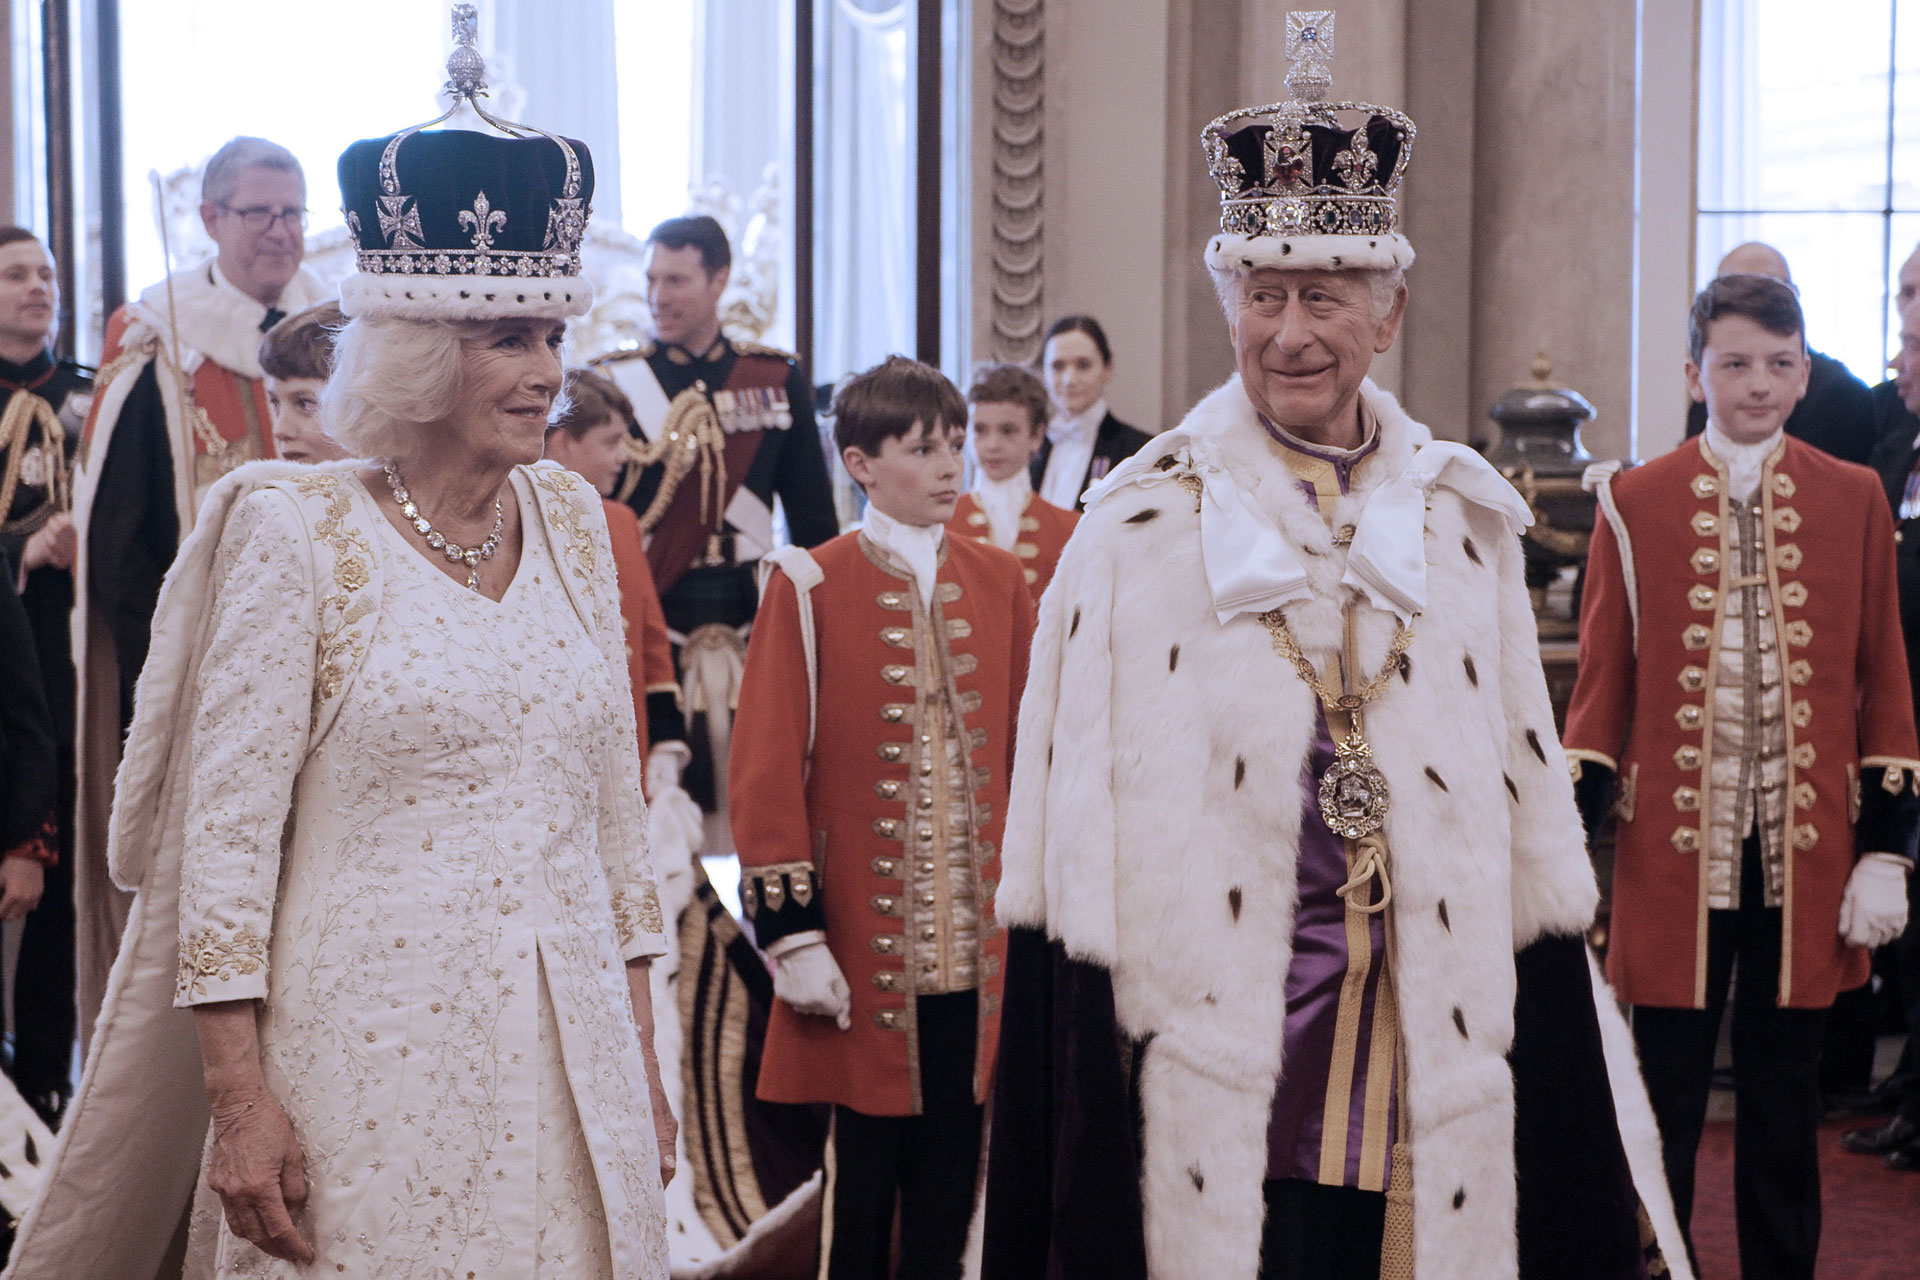 New Documentary Shows Behind The Scenes Of The King’s Coronation